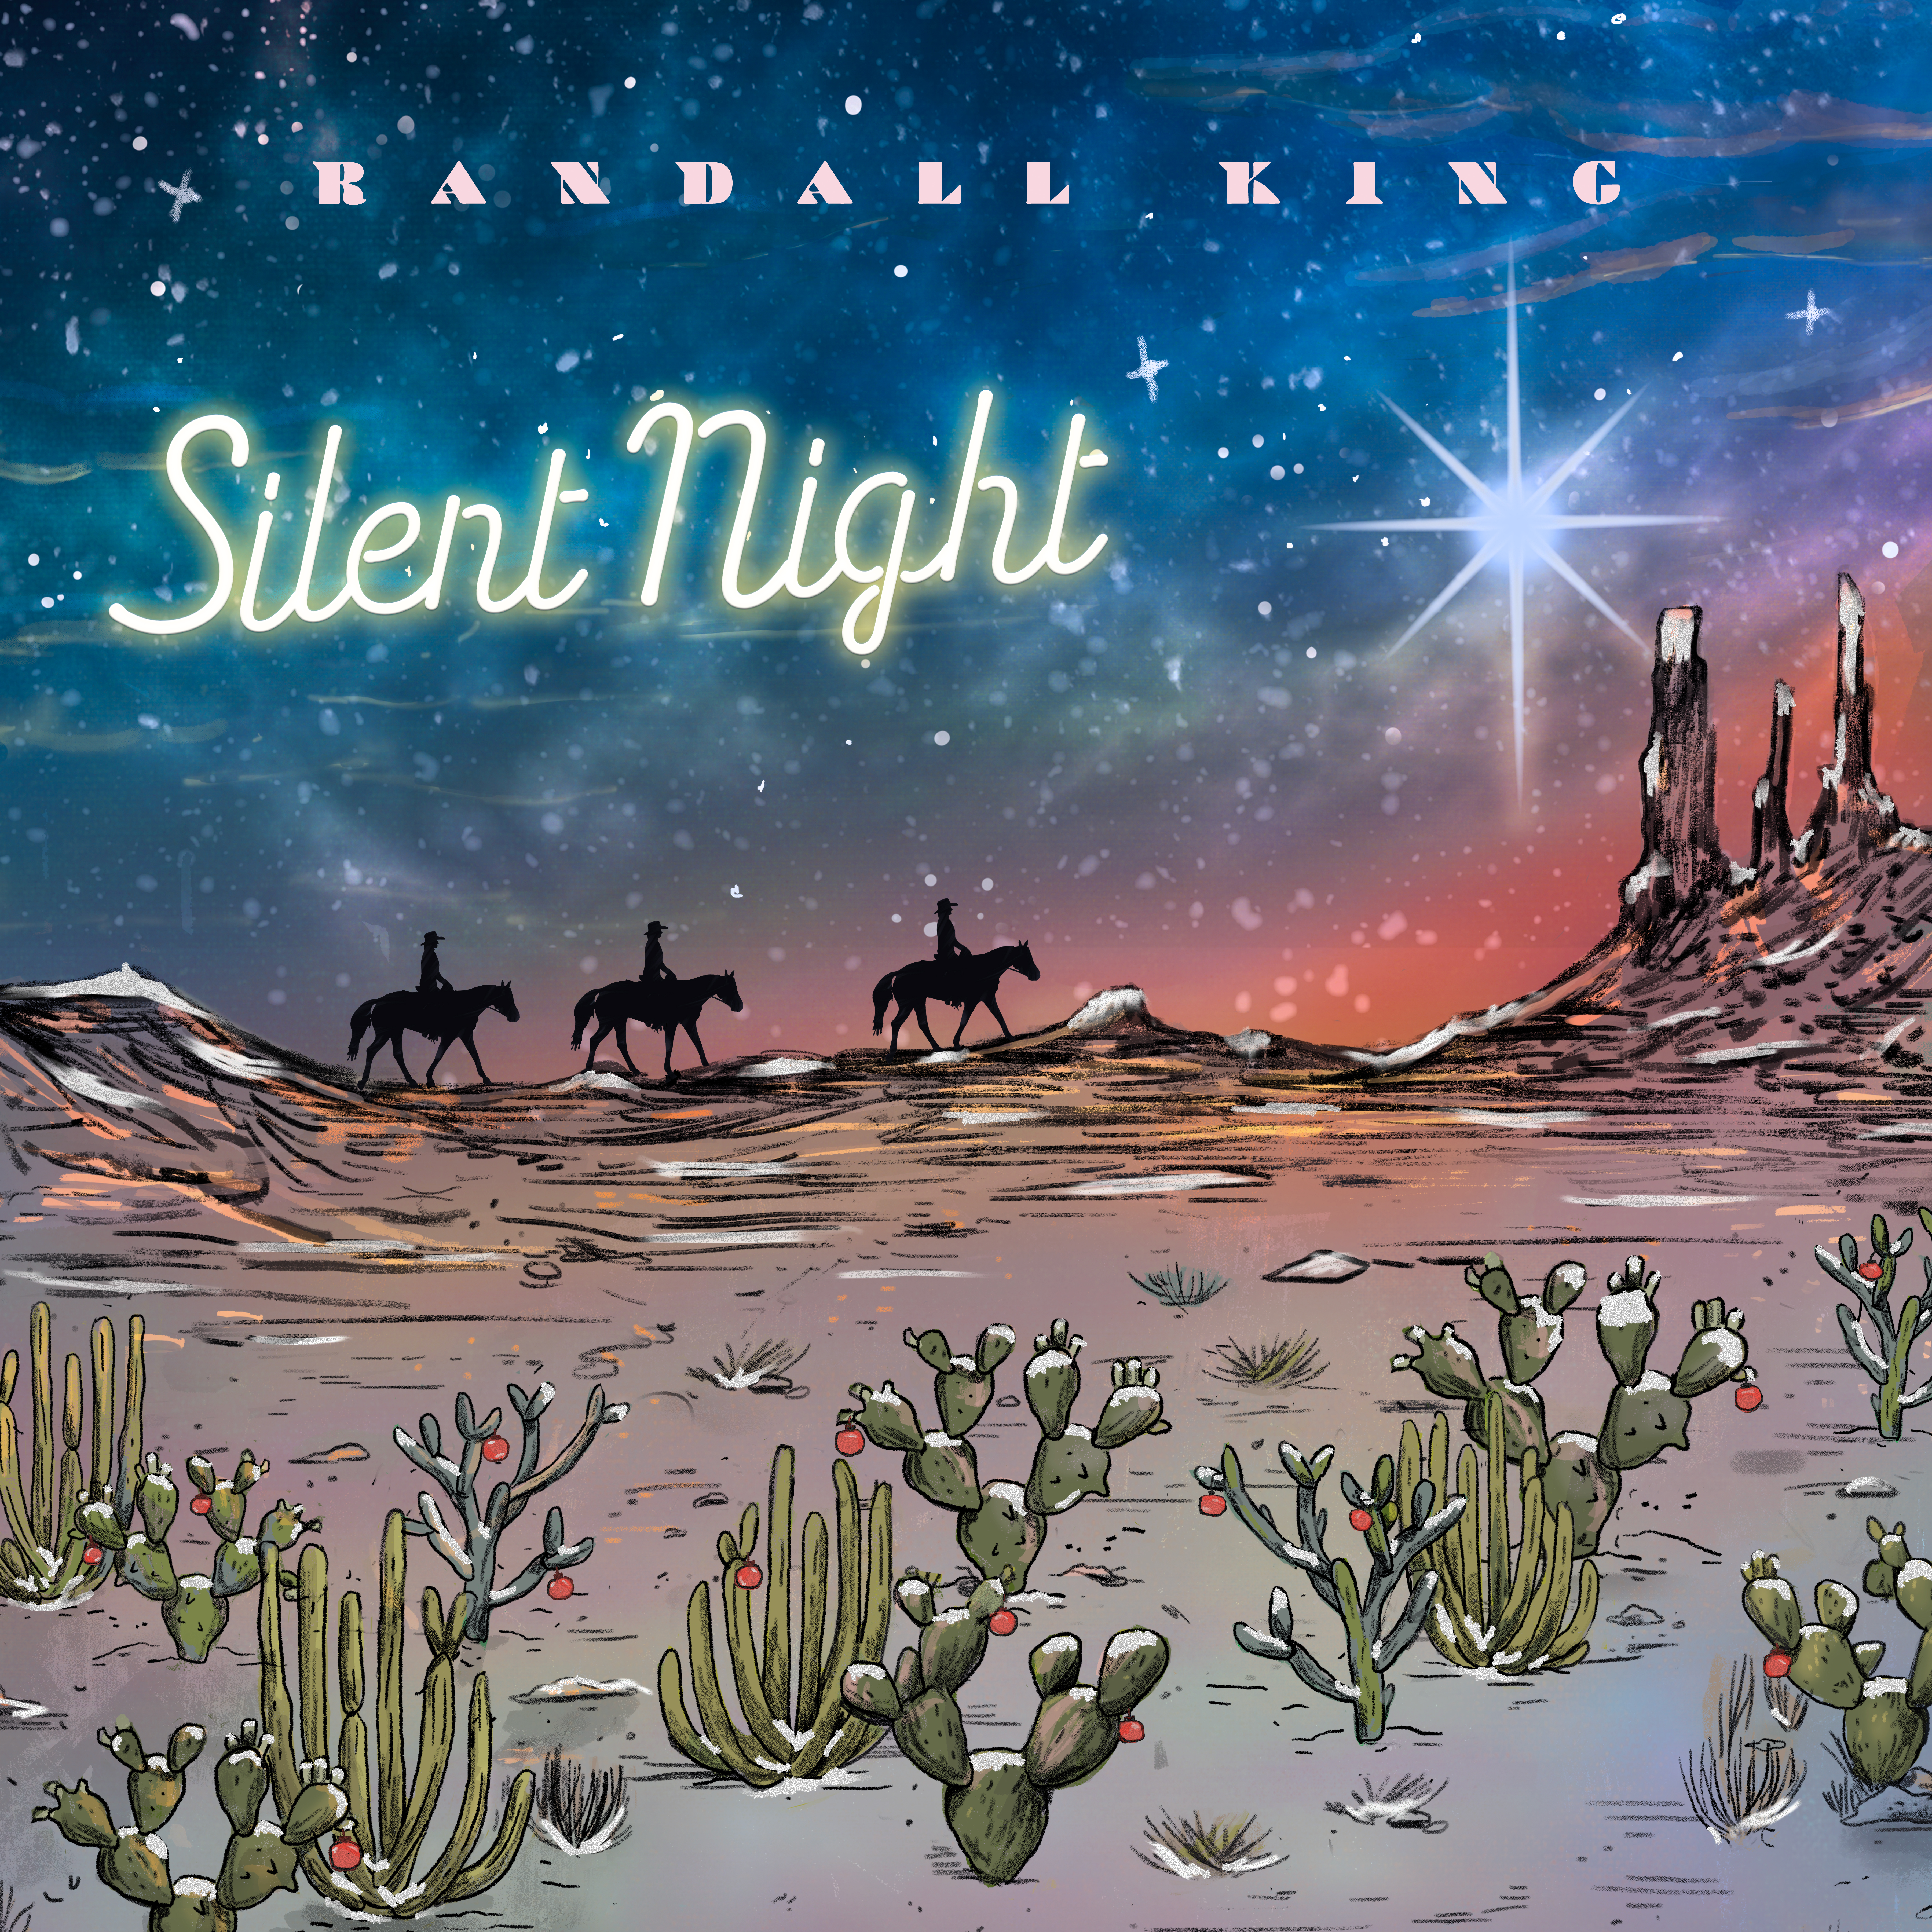 RANDALL KING OFFERS BARITONE-TREATMENT ON HOLIDAY CLASSIC “SILENT NIGHT”